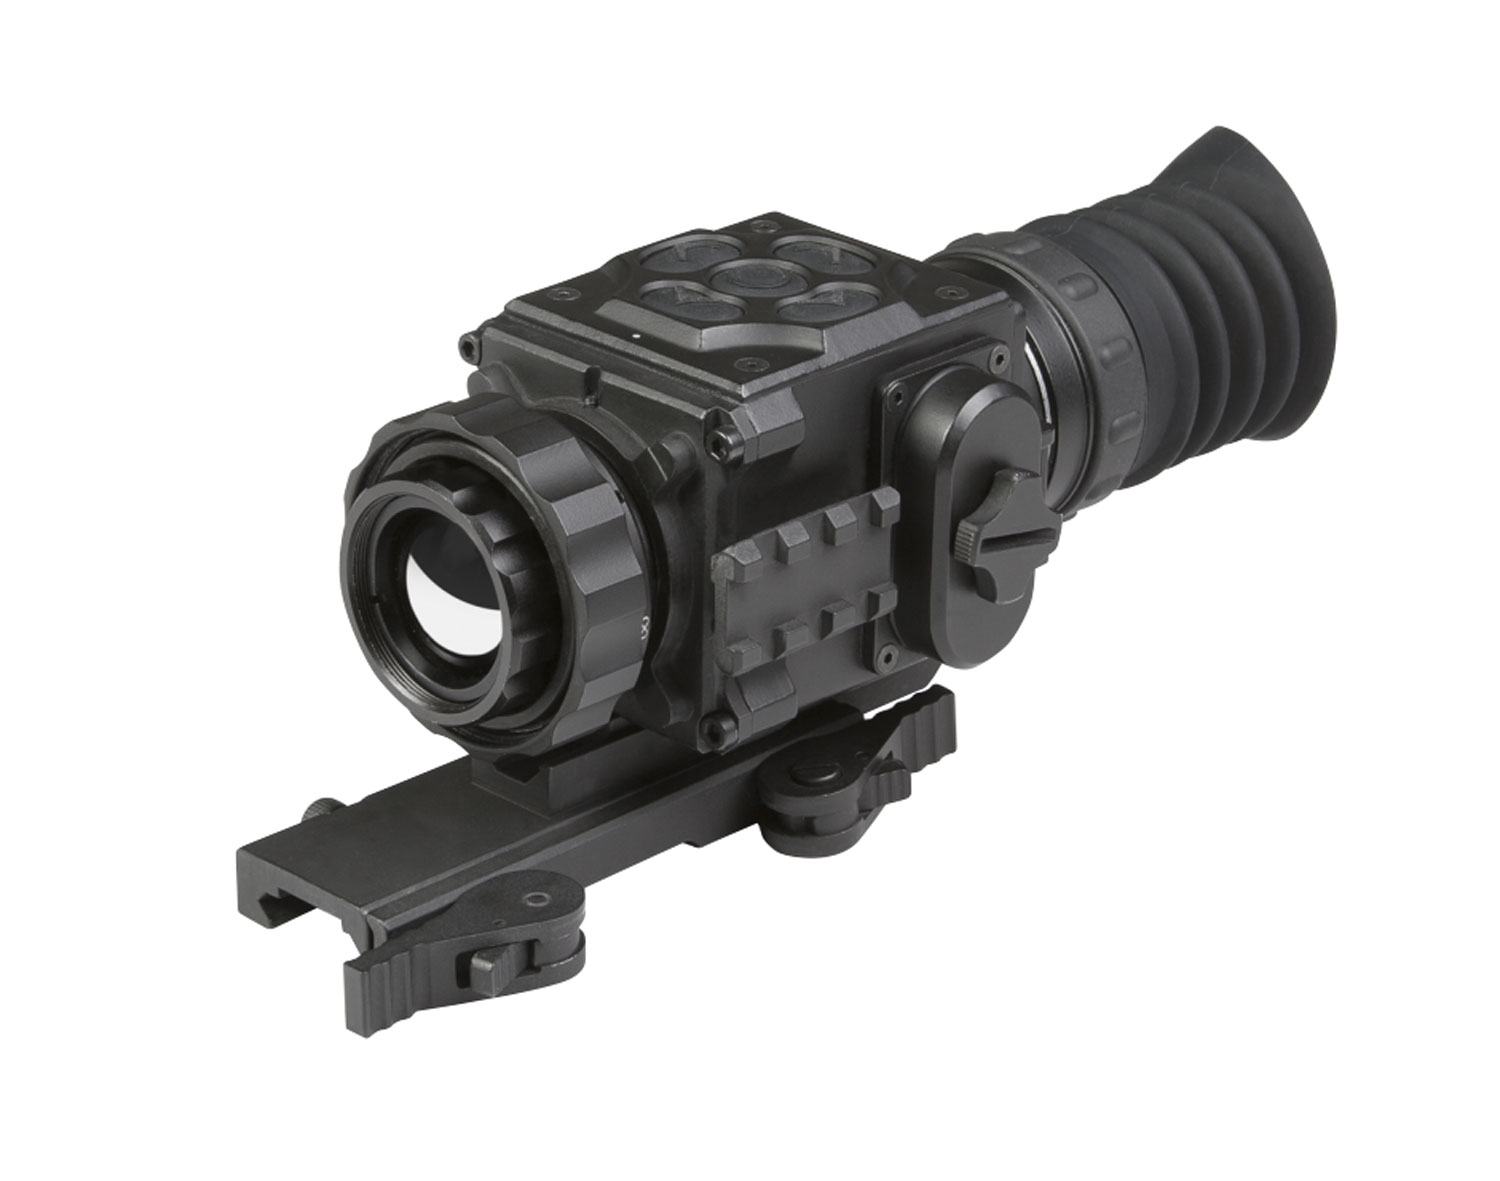 AGM Global Vision 3083455004SE21 Secutor TS25-384 Thermal Rifle Scope Black Matte 1.2x 25mm Multi Reticle Digital 1x/2x/4x/PIP Zoom 384x288, 50Hz Resolution Features Rangefinder